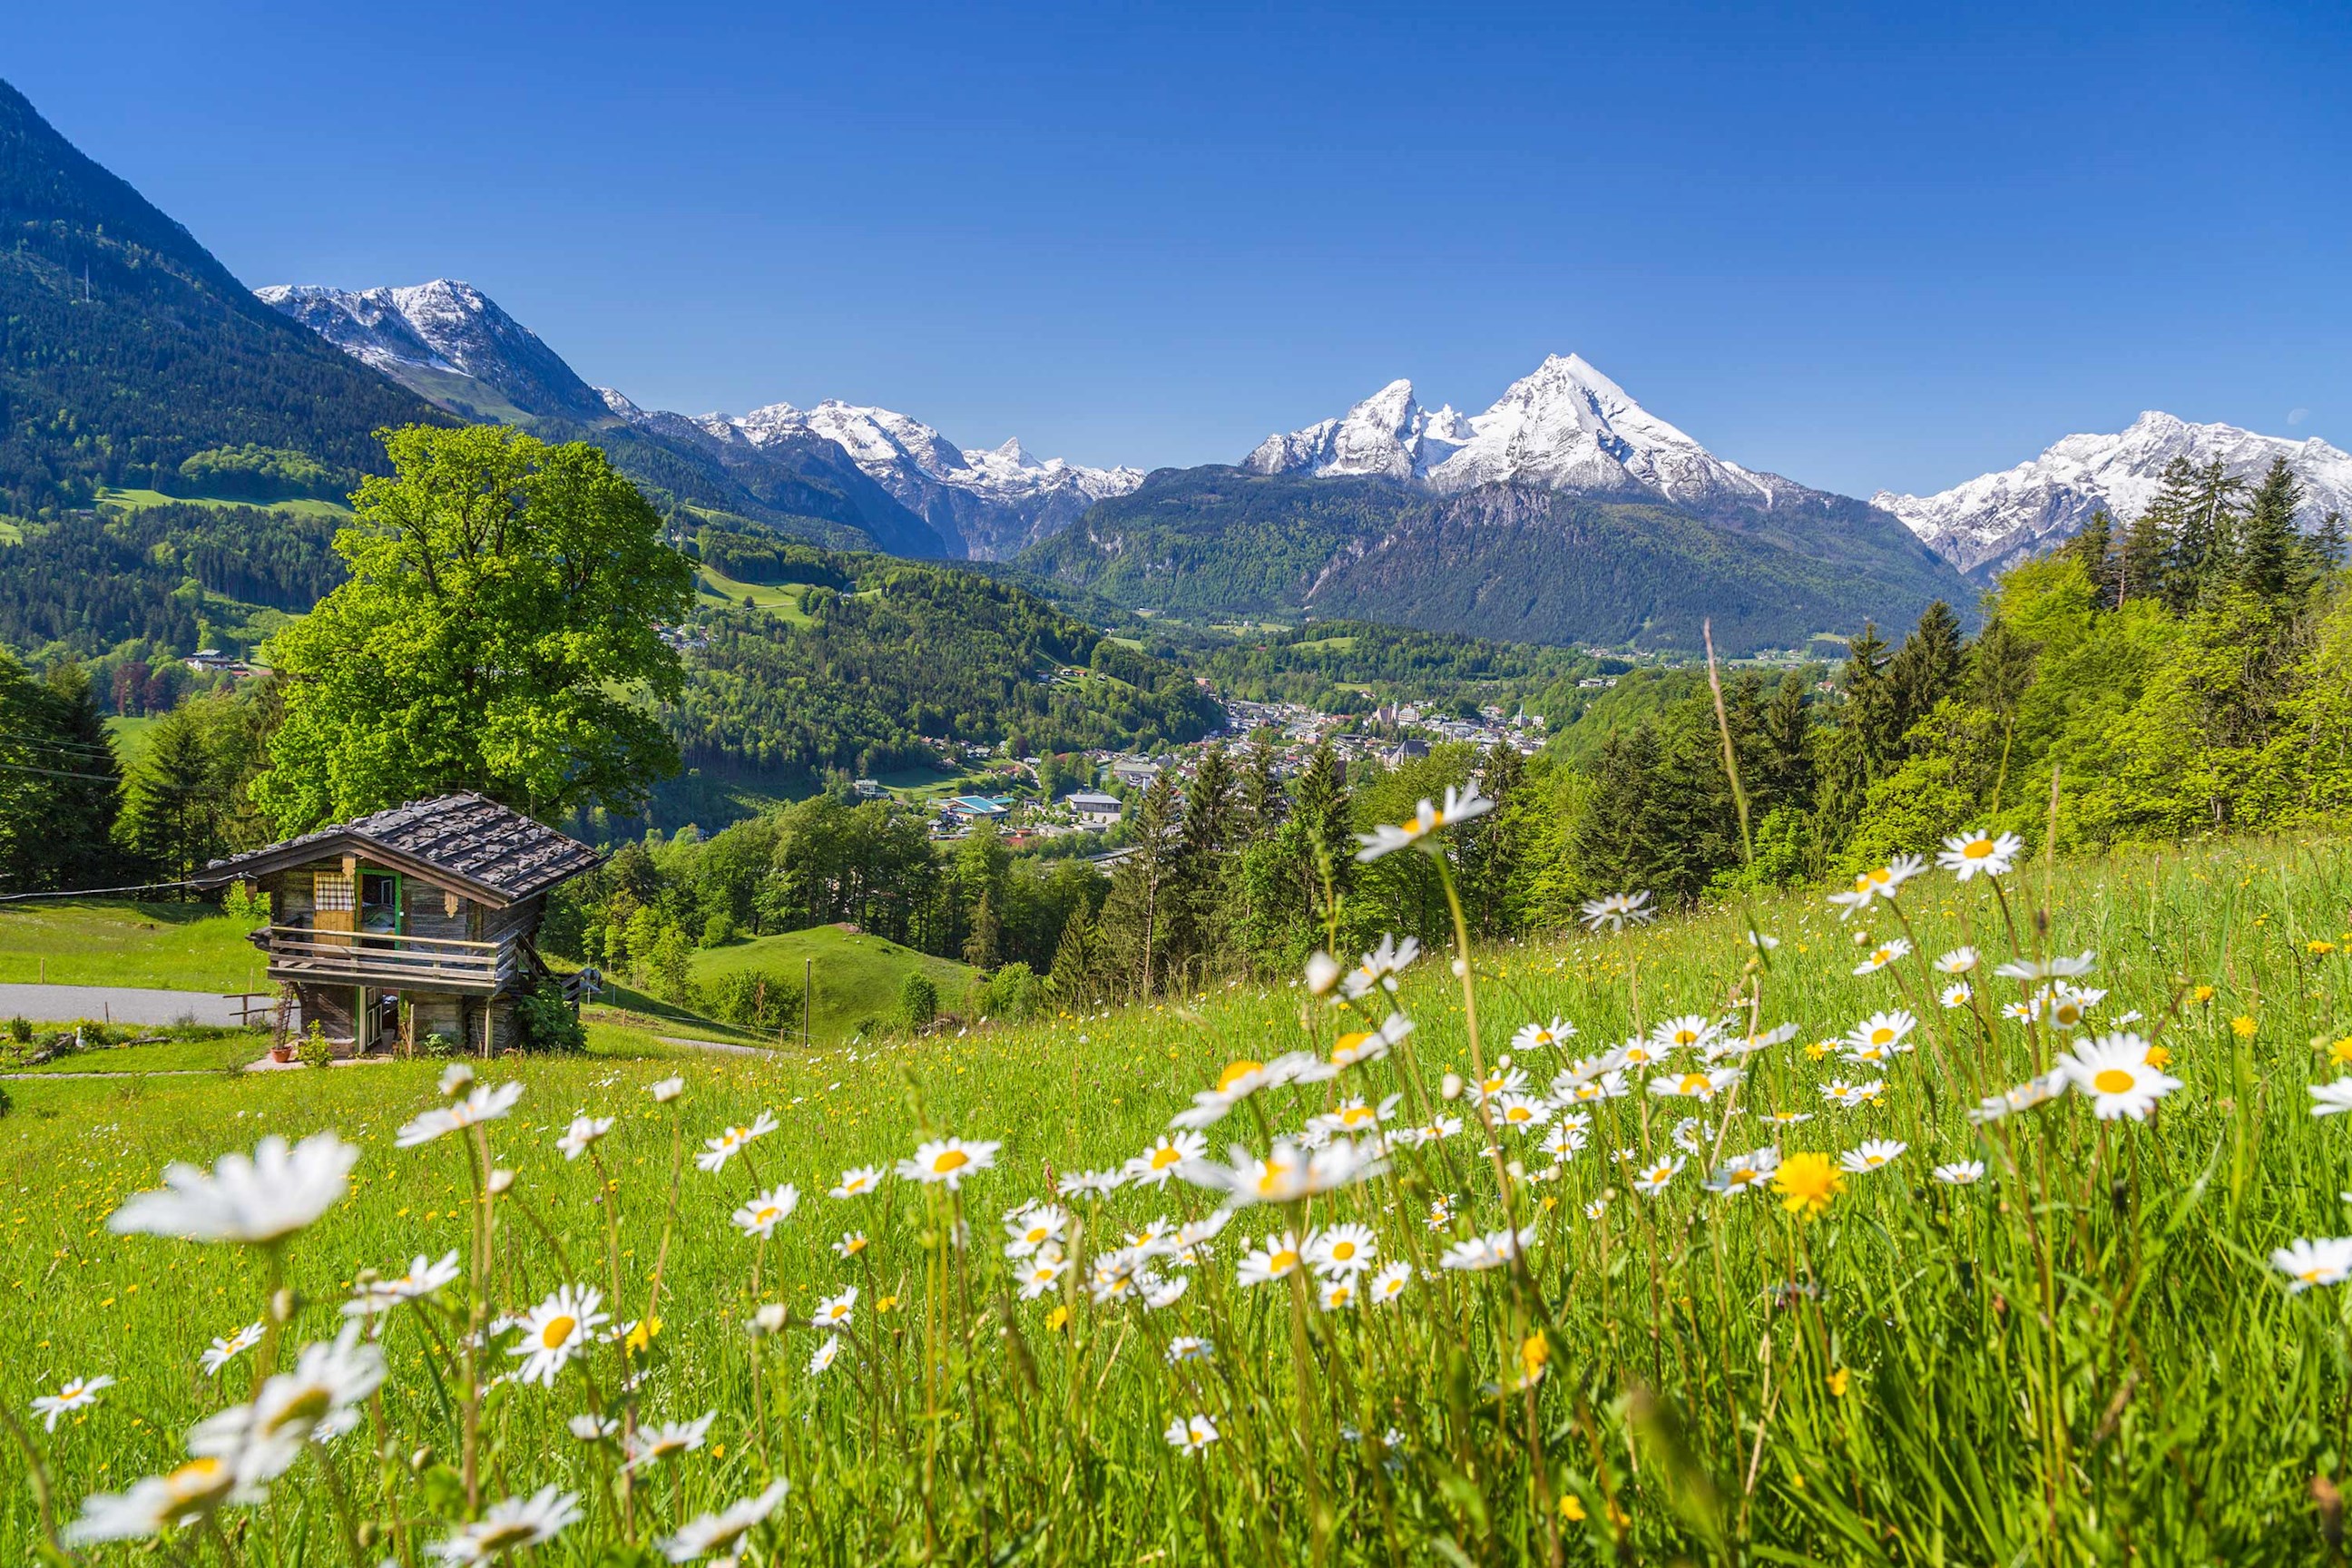 How to tour The Sound of Music